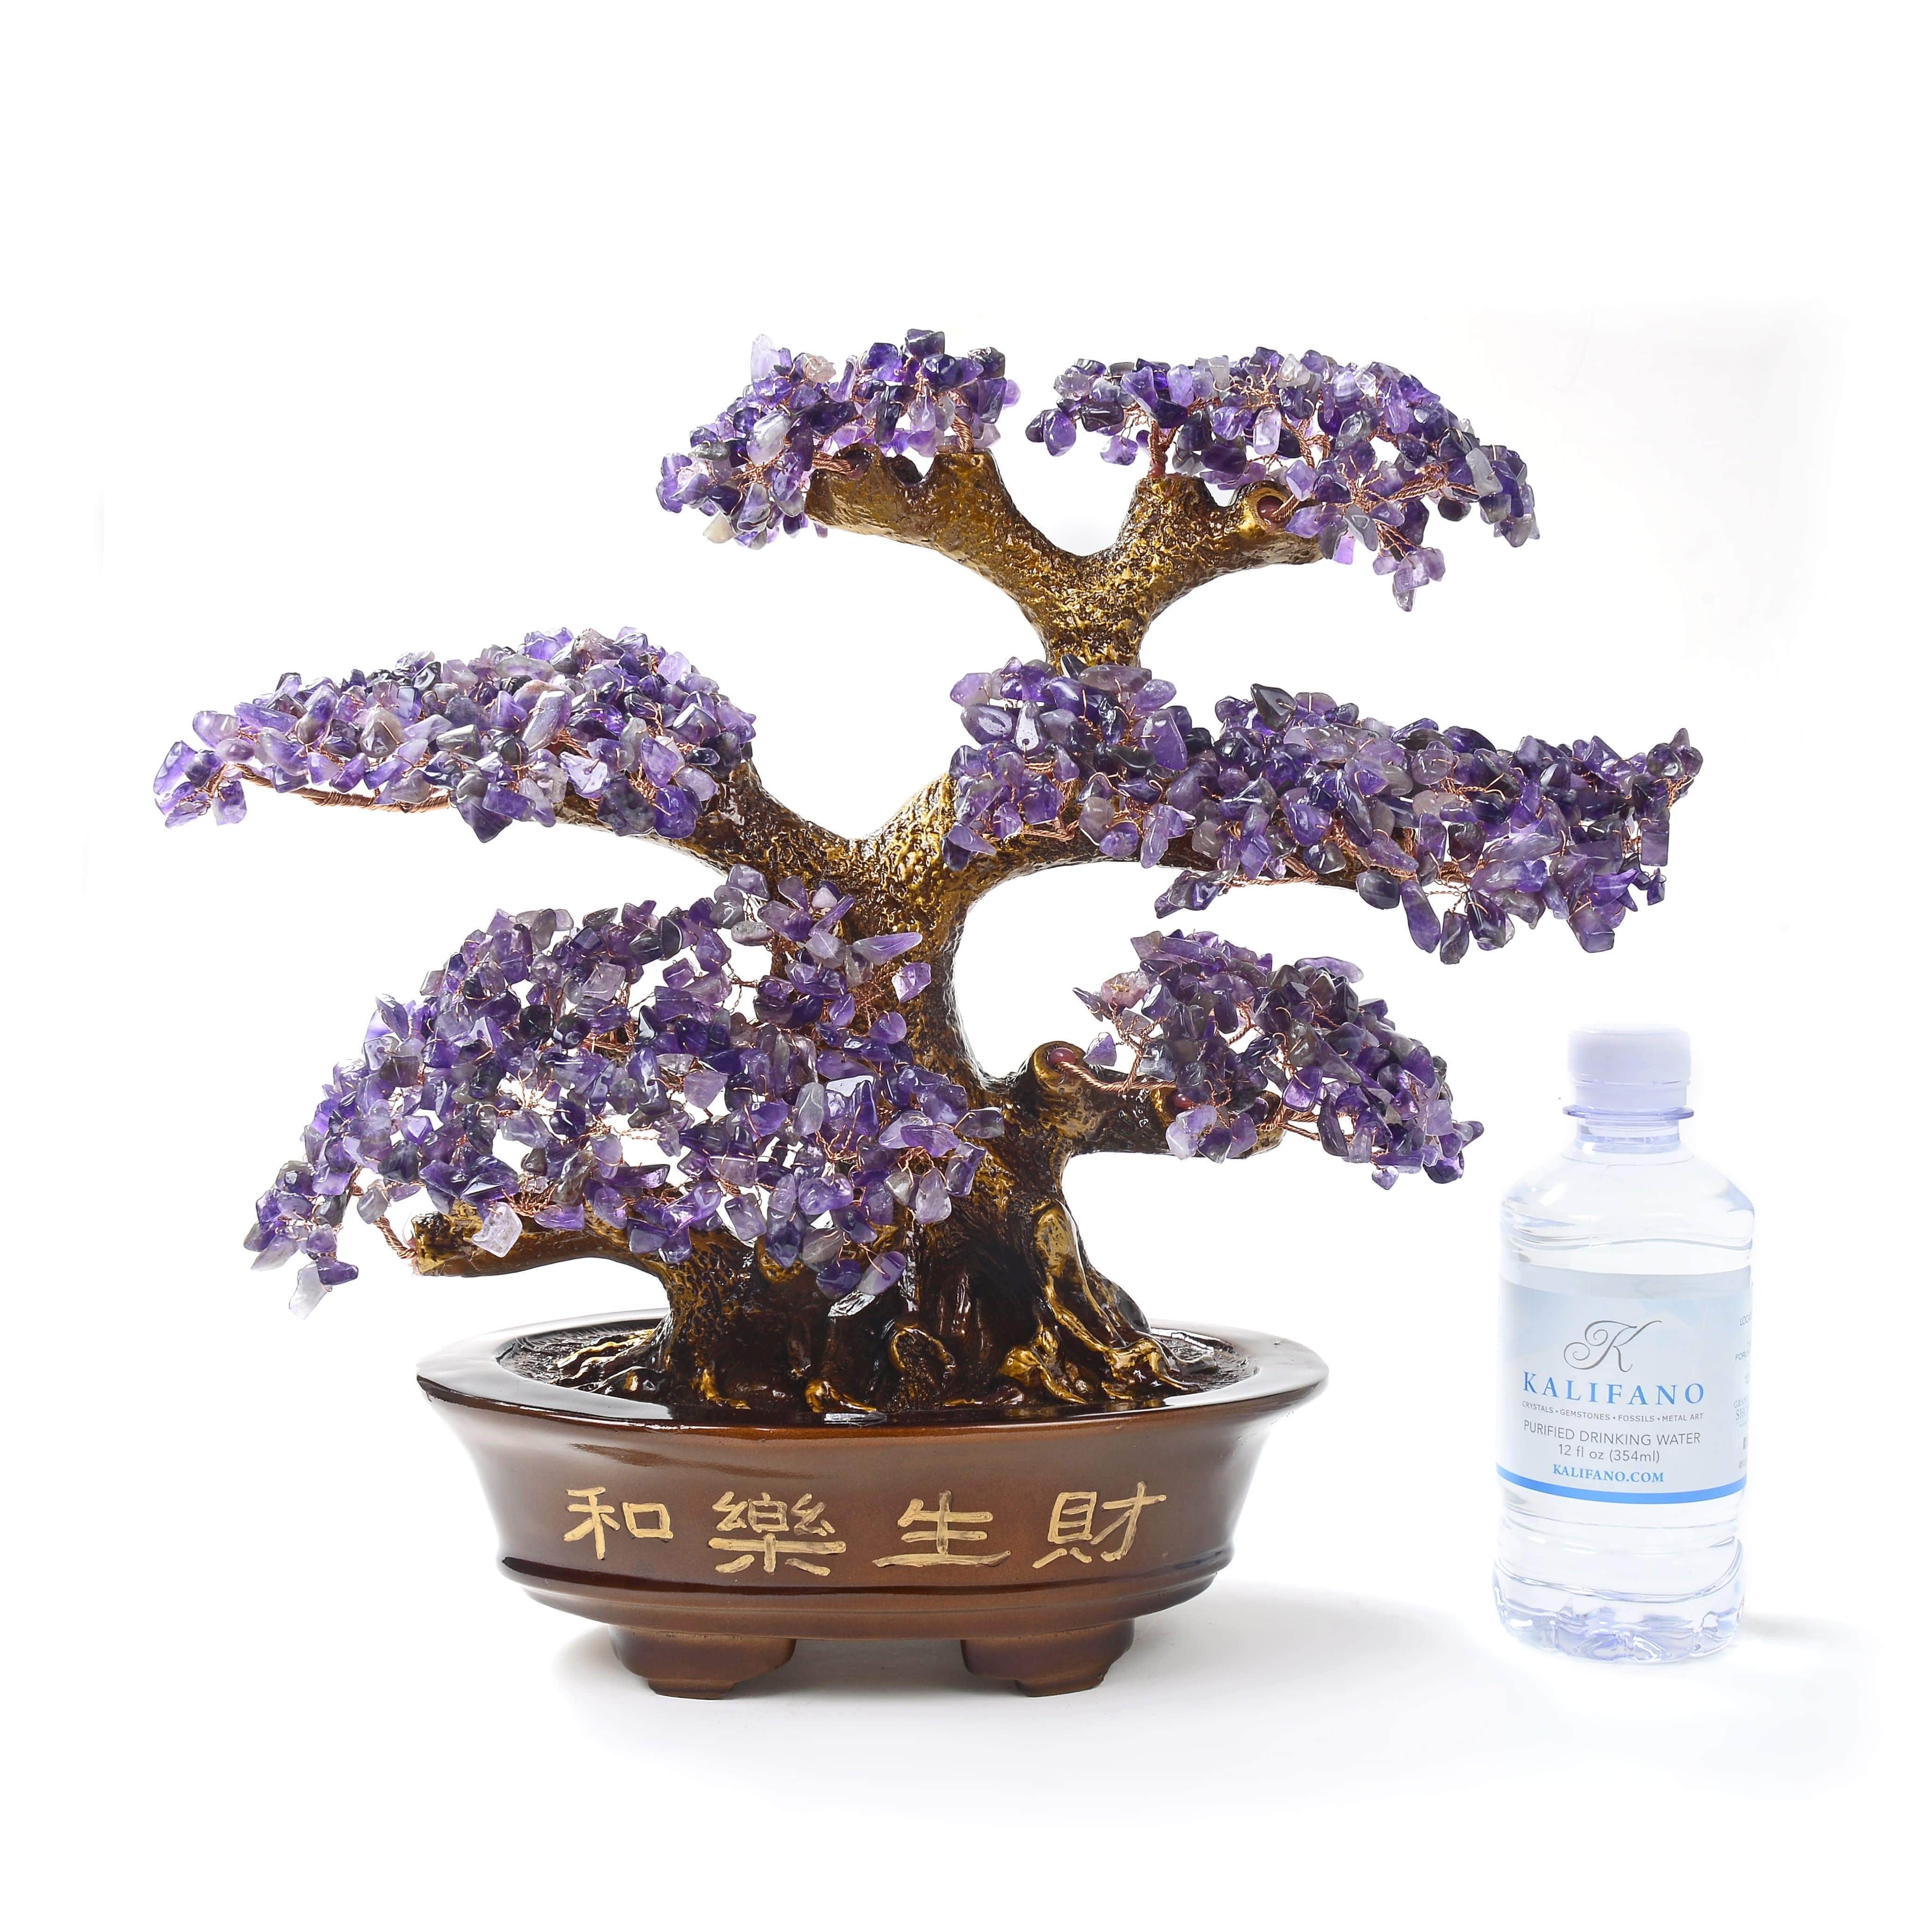 Kalifano Gemstone Trees Amethyst Tree of Life on Resin and Wood Base with 1,251 Natural Gemstones K9151-AM